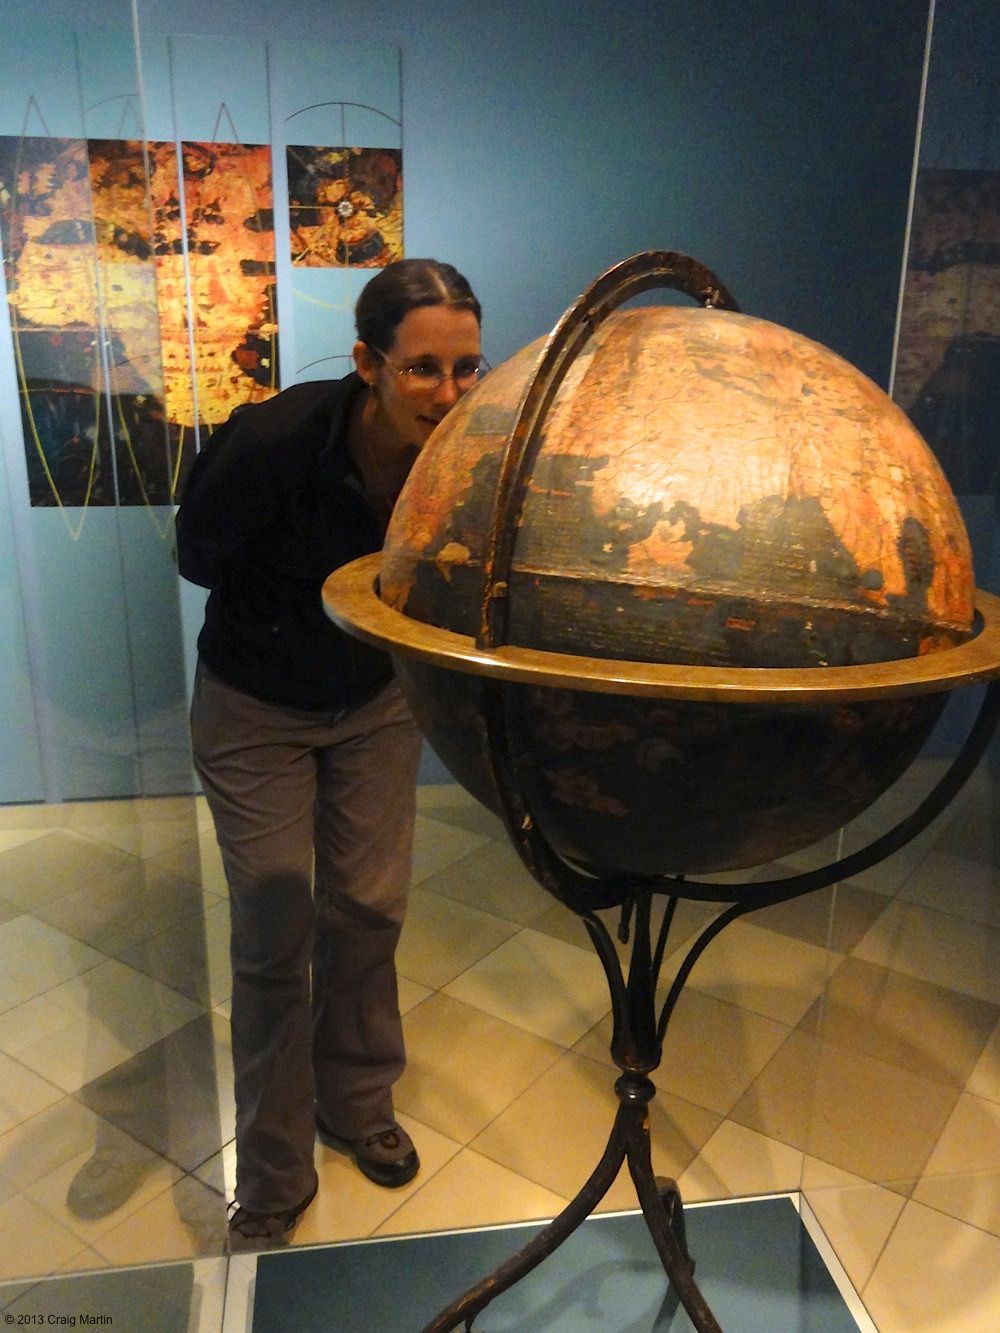 The world's oldest globe at the German History Museum